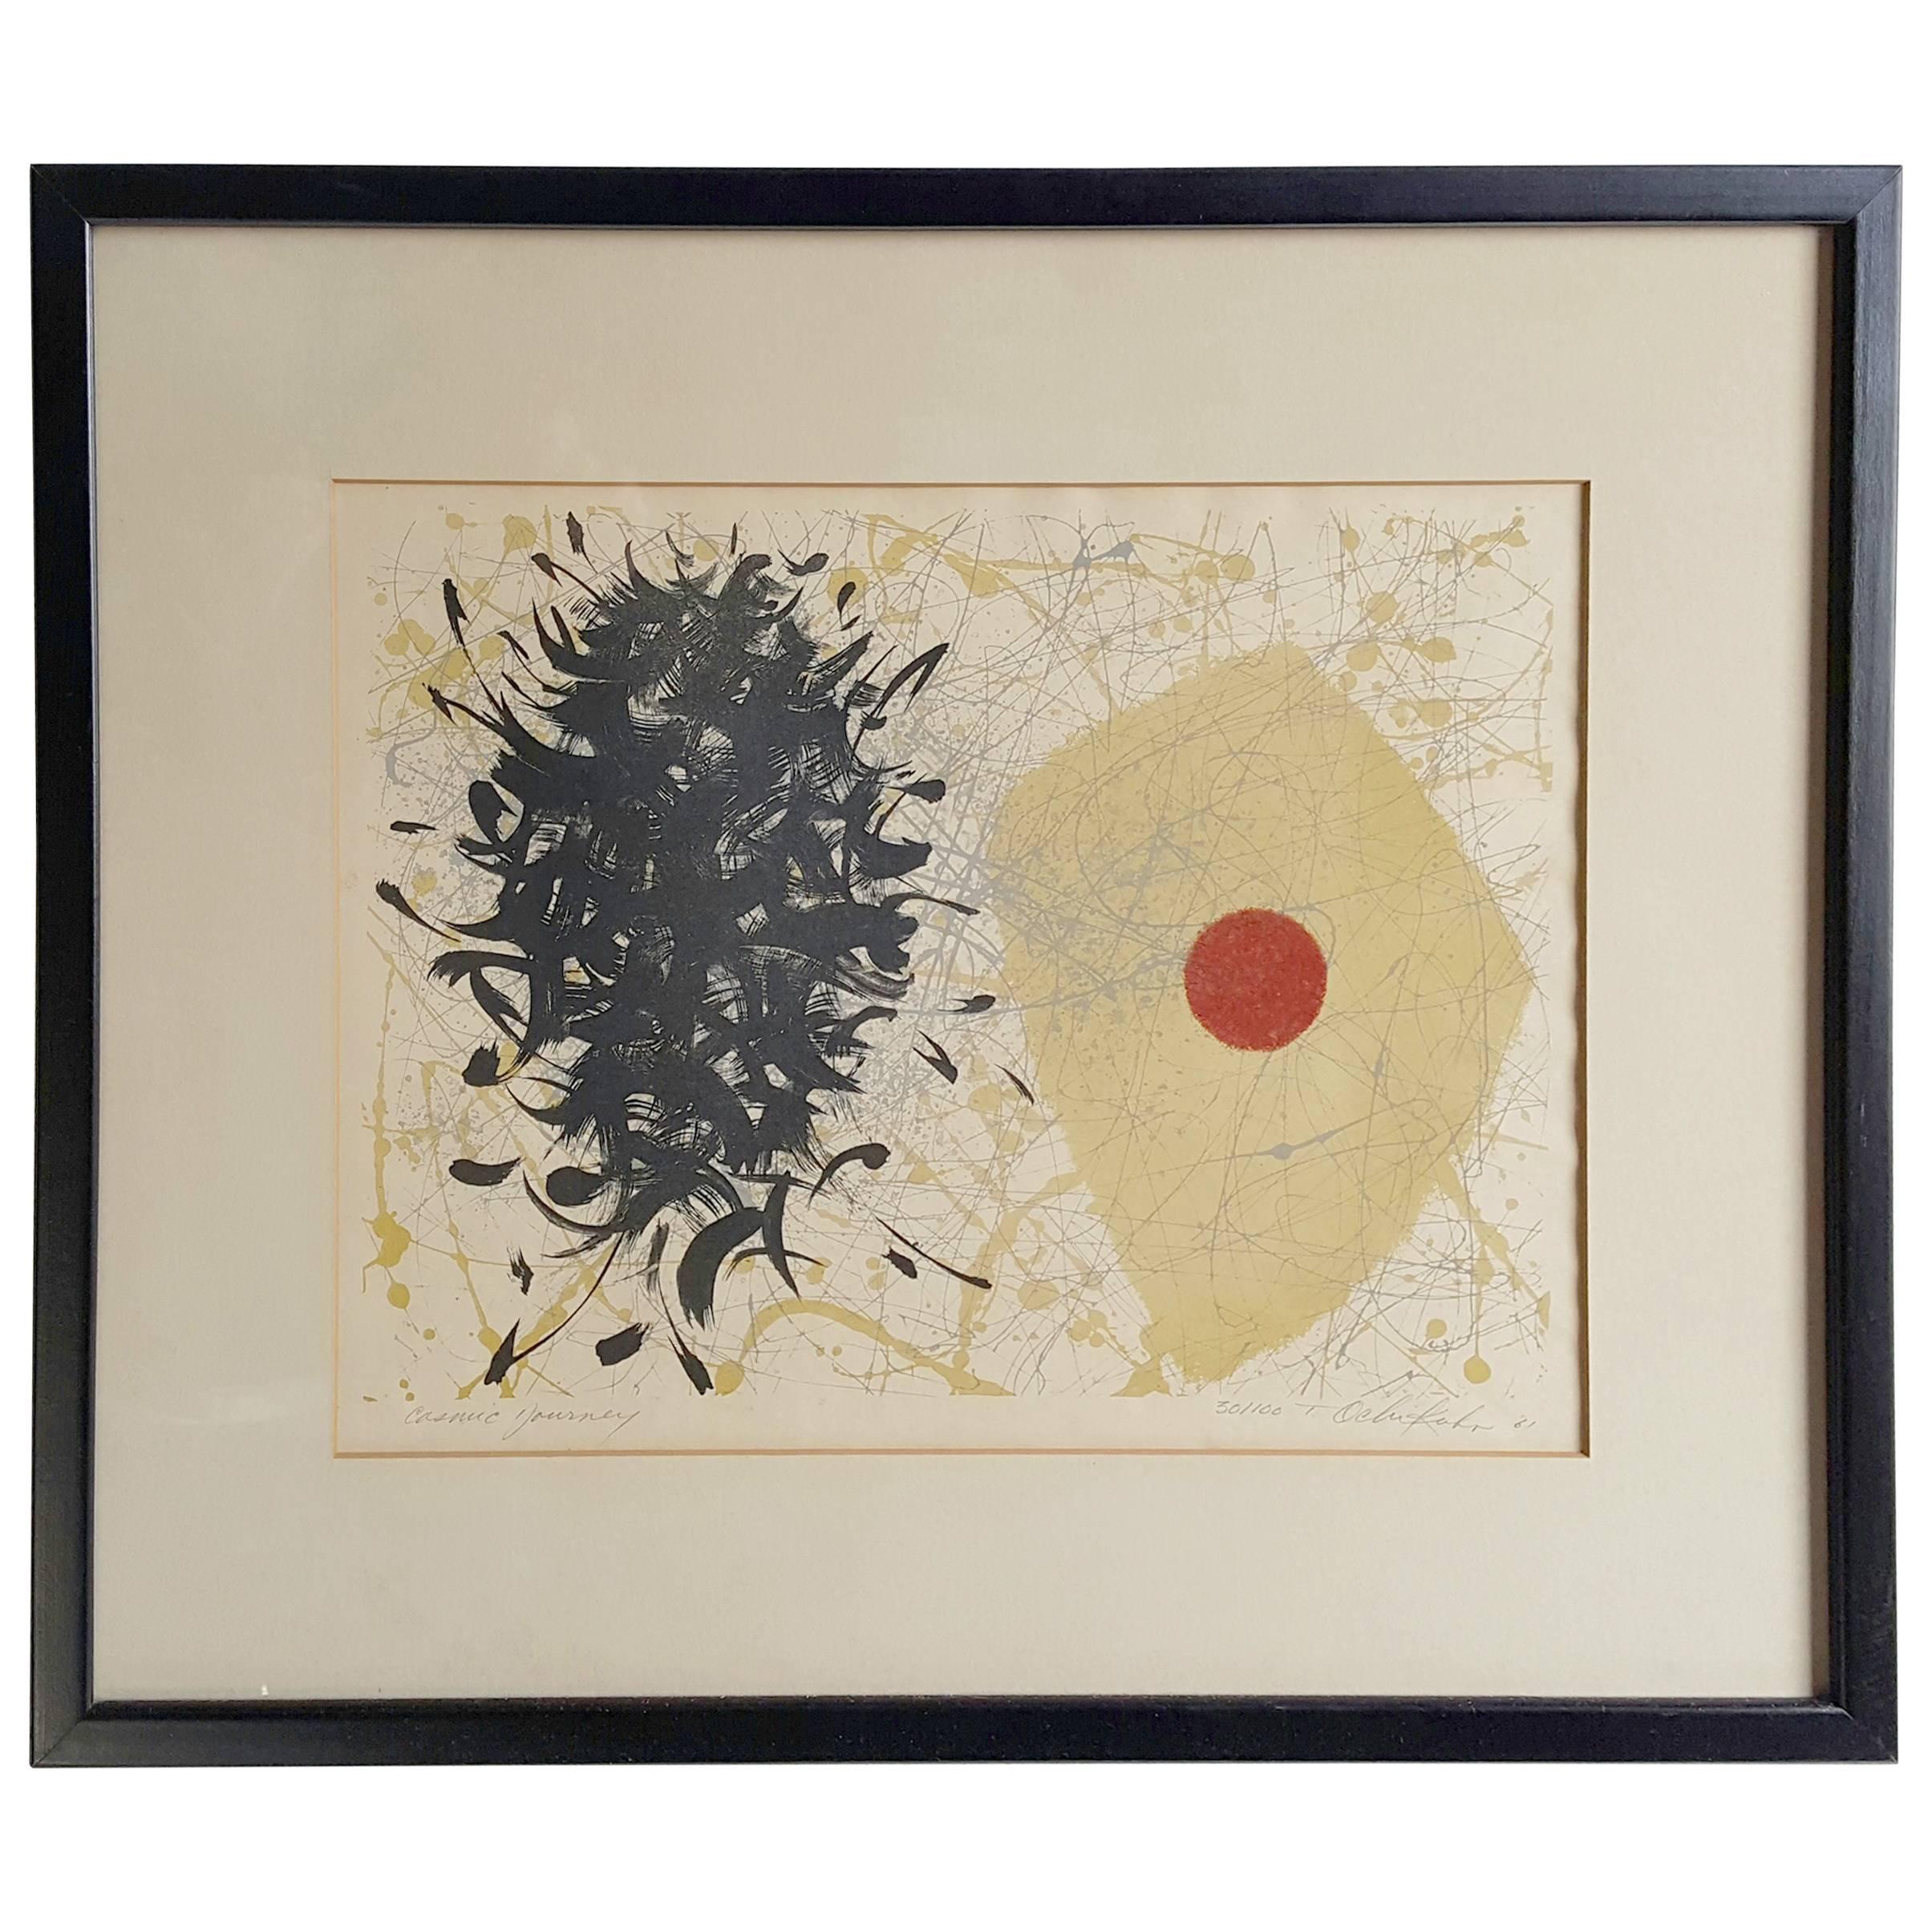 Modernist Abstract Lithograph by Tetsuo Ochikubo, "Cosmic Journey"